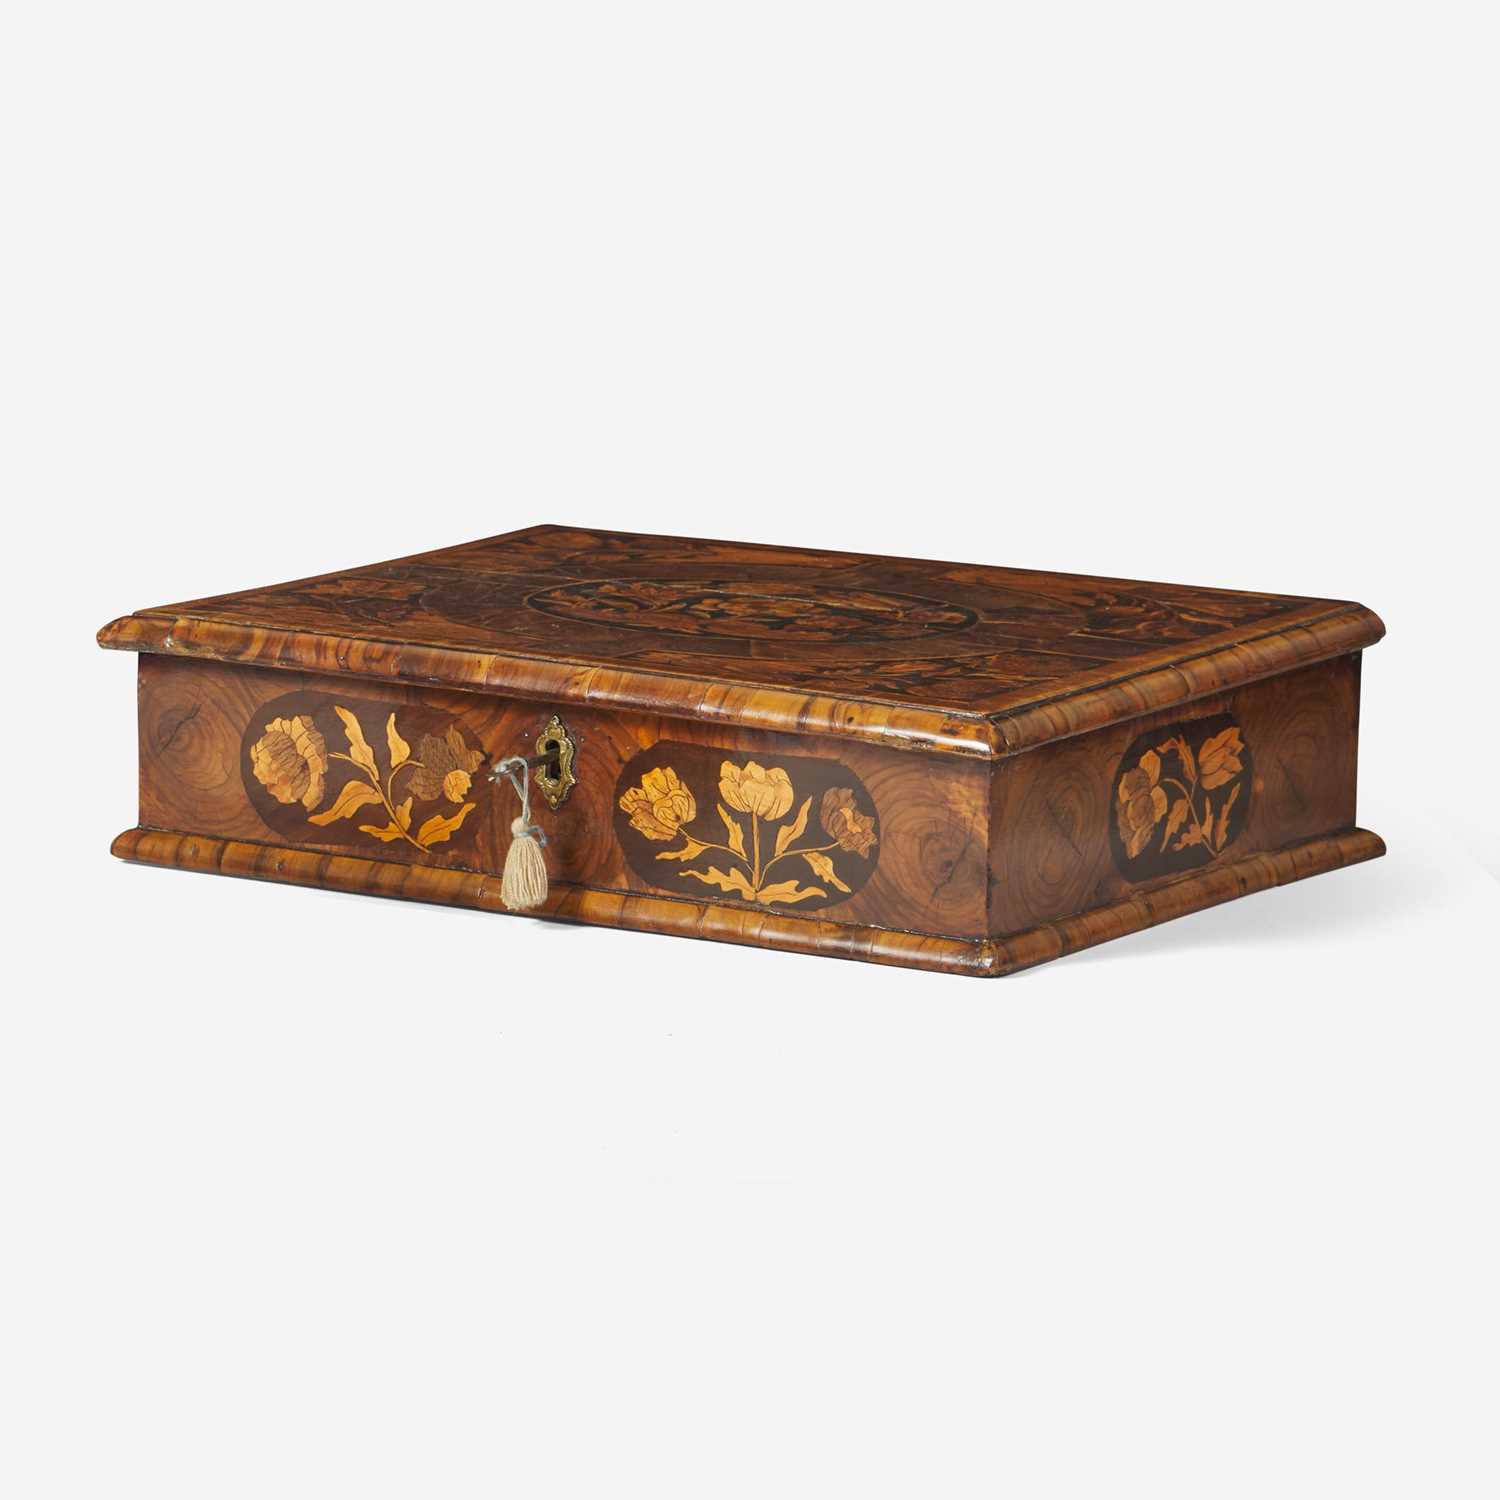 Lot 3 - A William & Mary floral marquetry and oyster-veneered walnut box